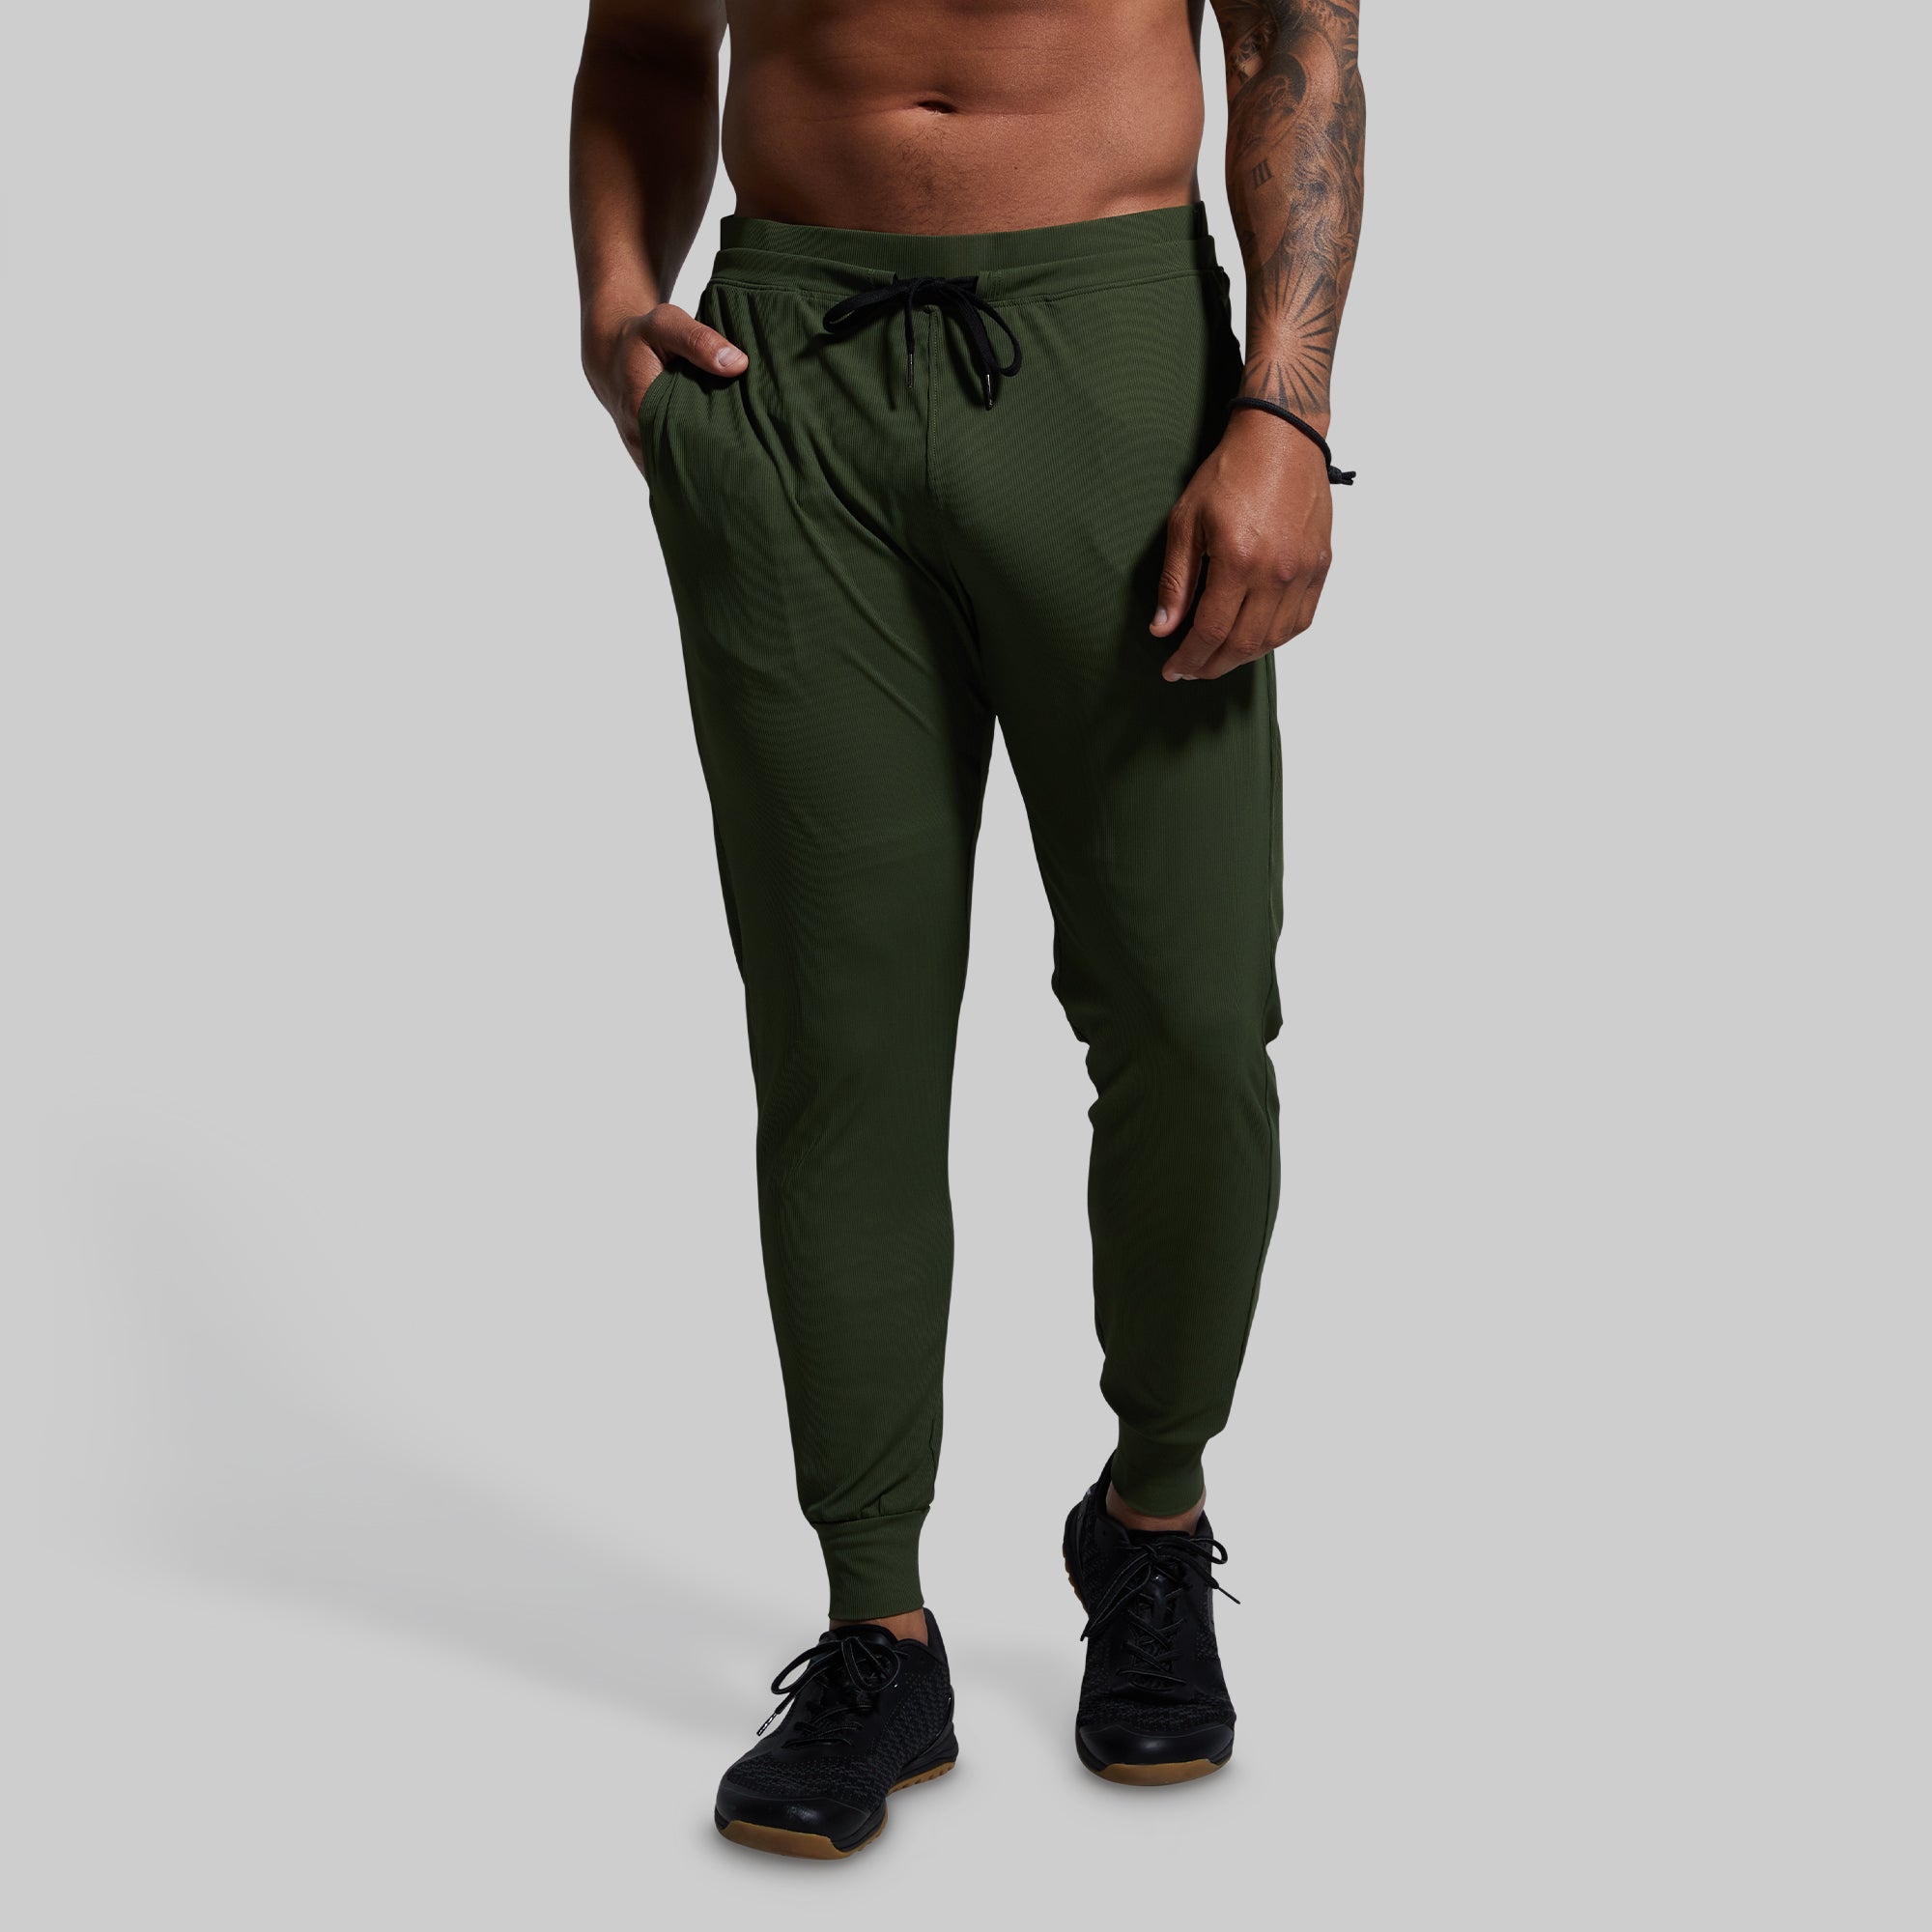 Sweatpants for sale in Fort Myers, Florida